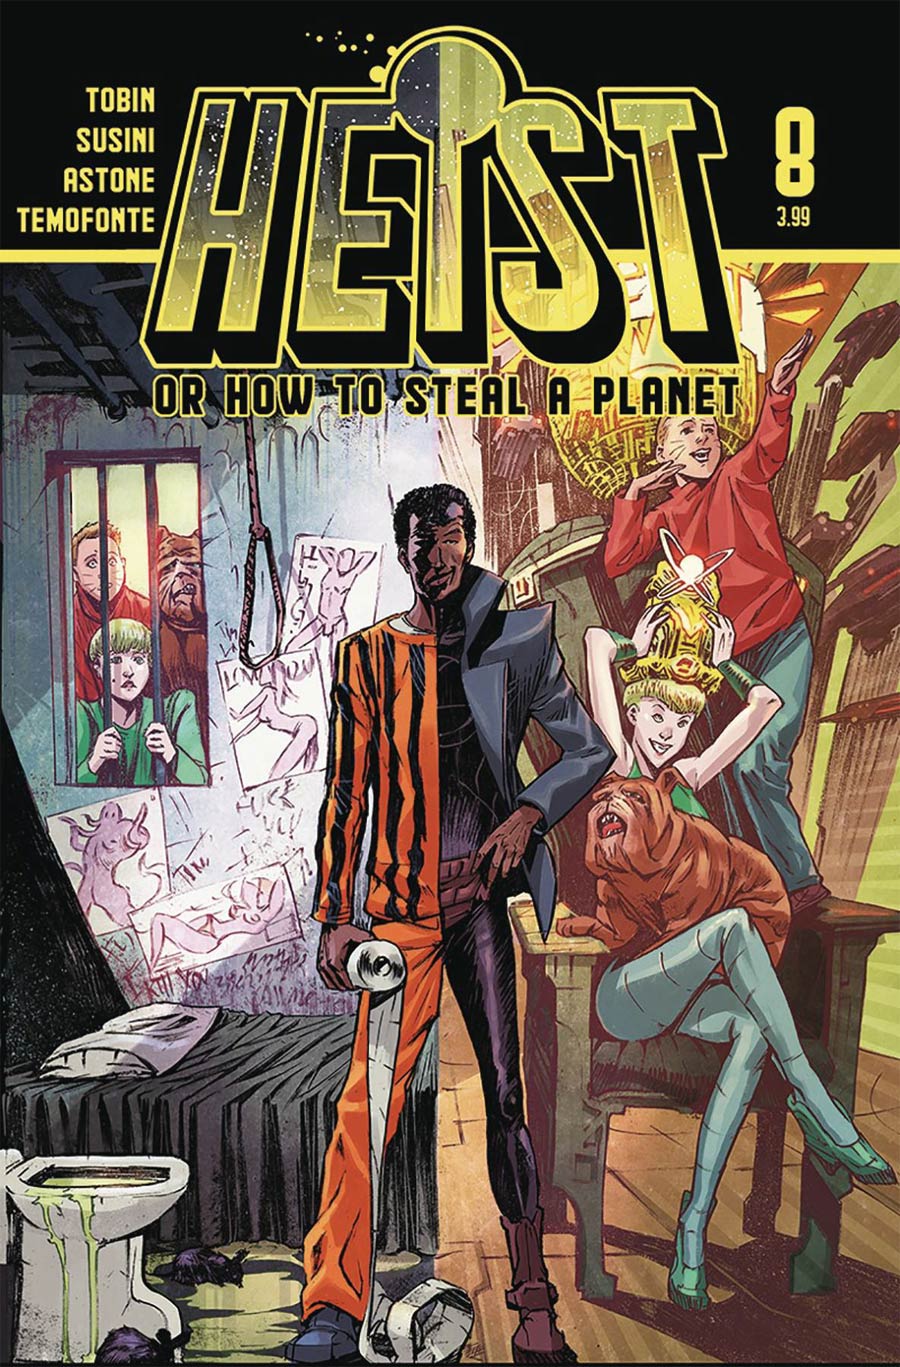 Heist Or How To Steal A Planet #8